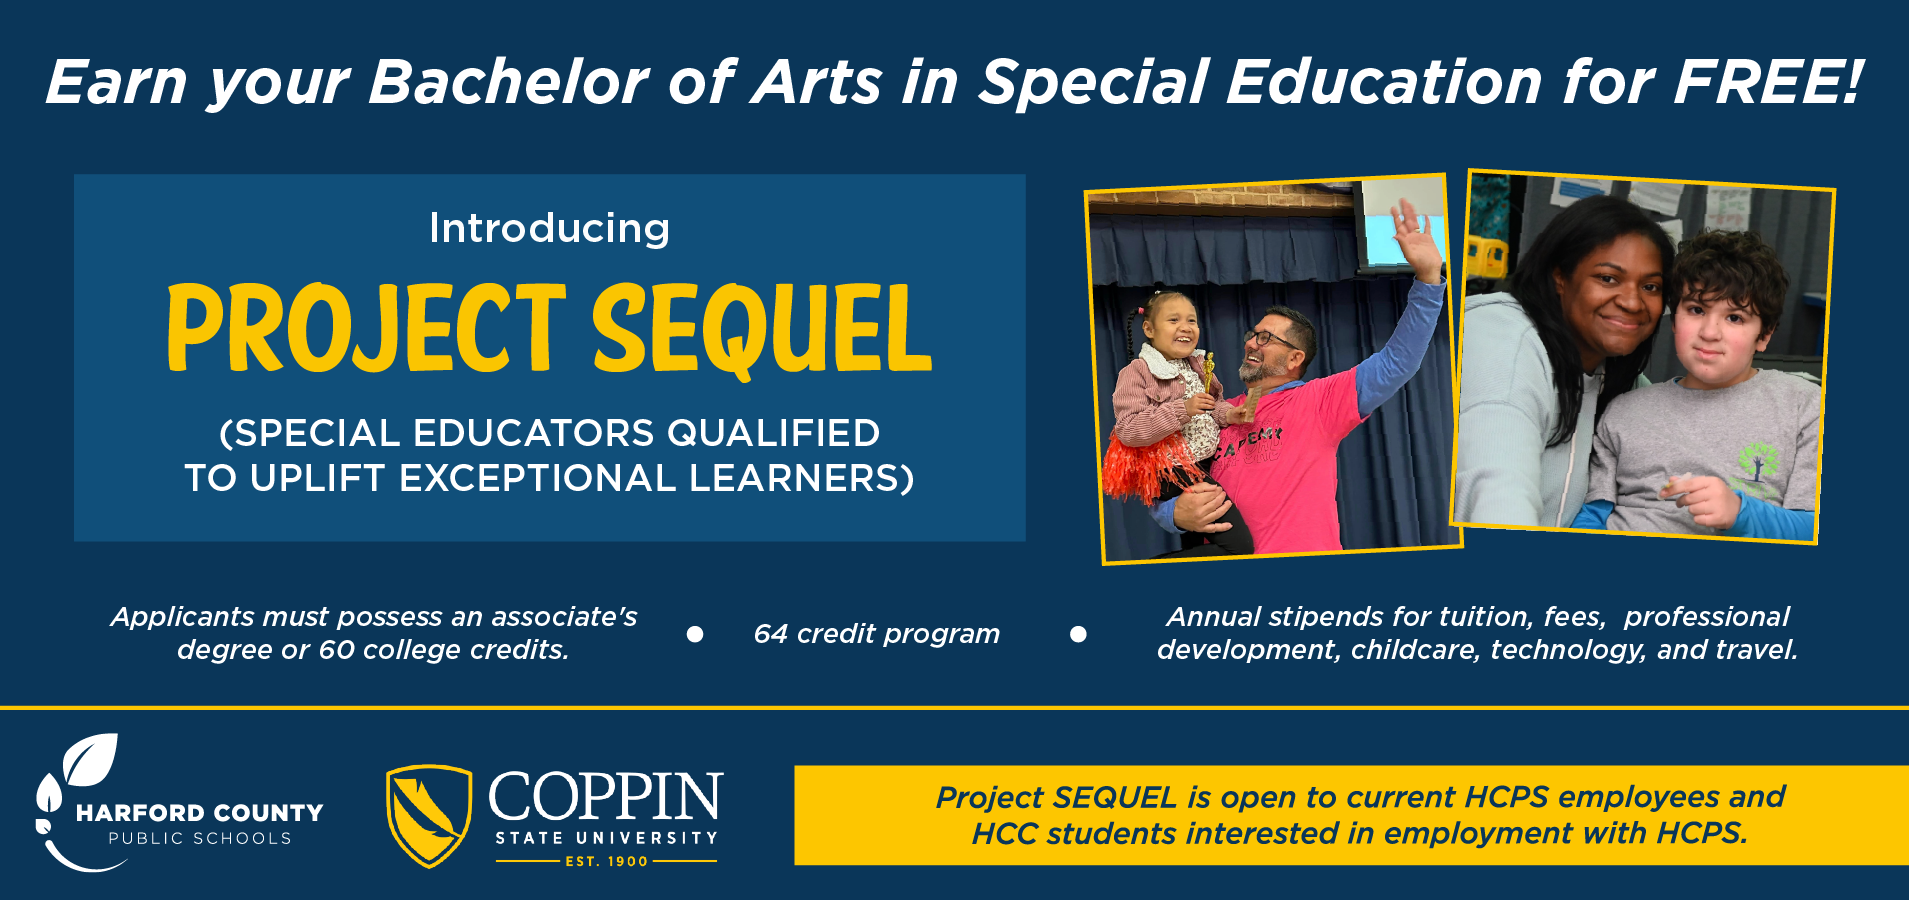 Earn your Bachelor of Arts in Special Education for free through Project SEQUEL, a partnership with Coppin State University.